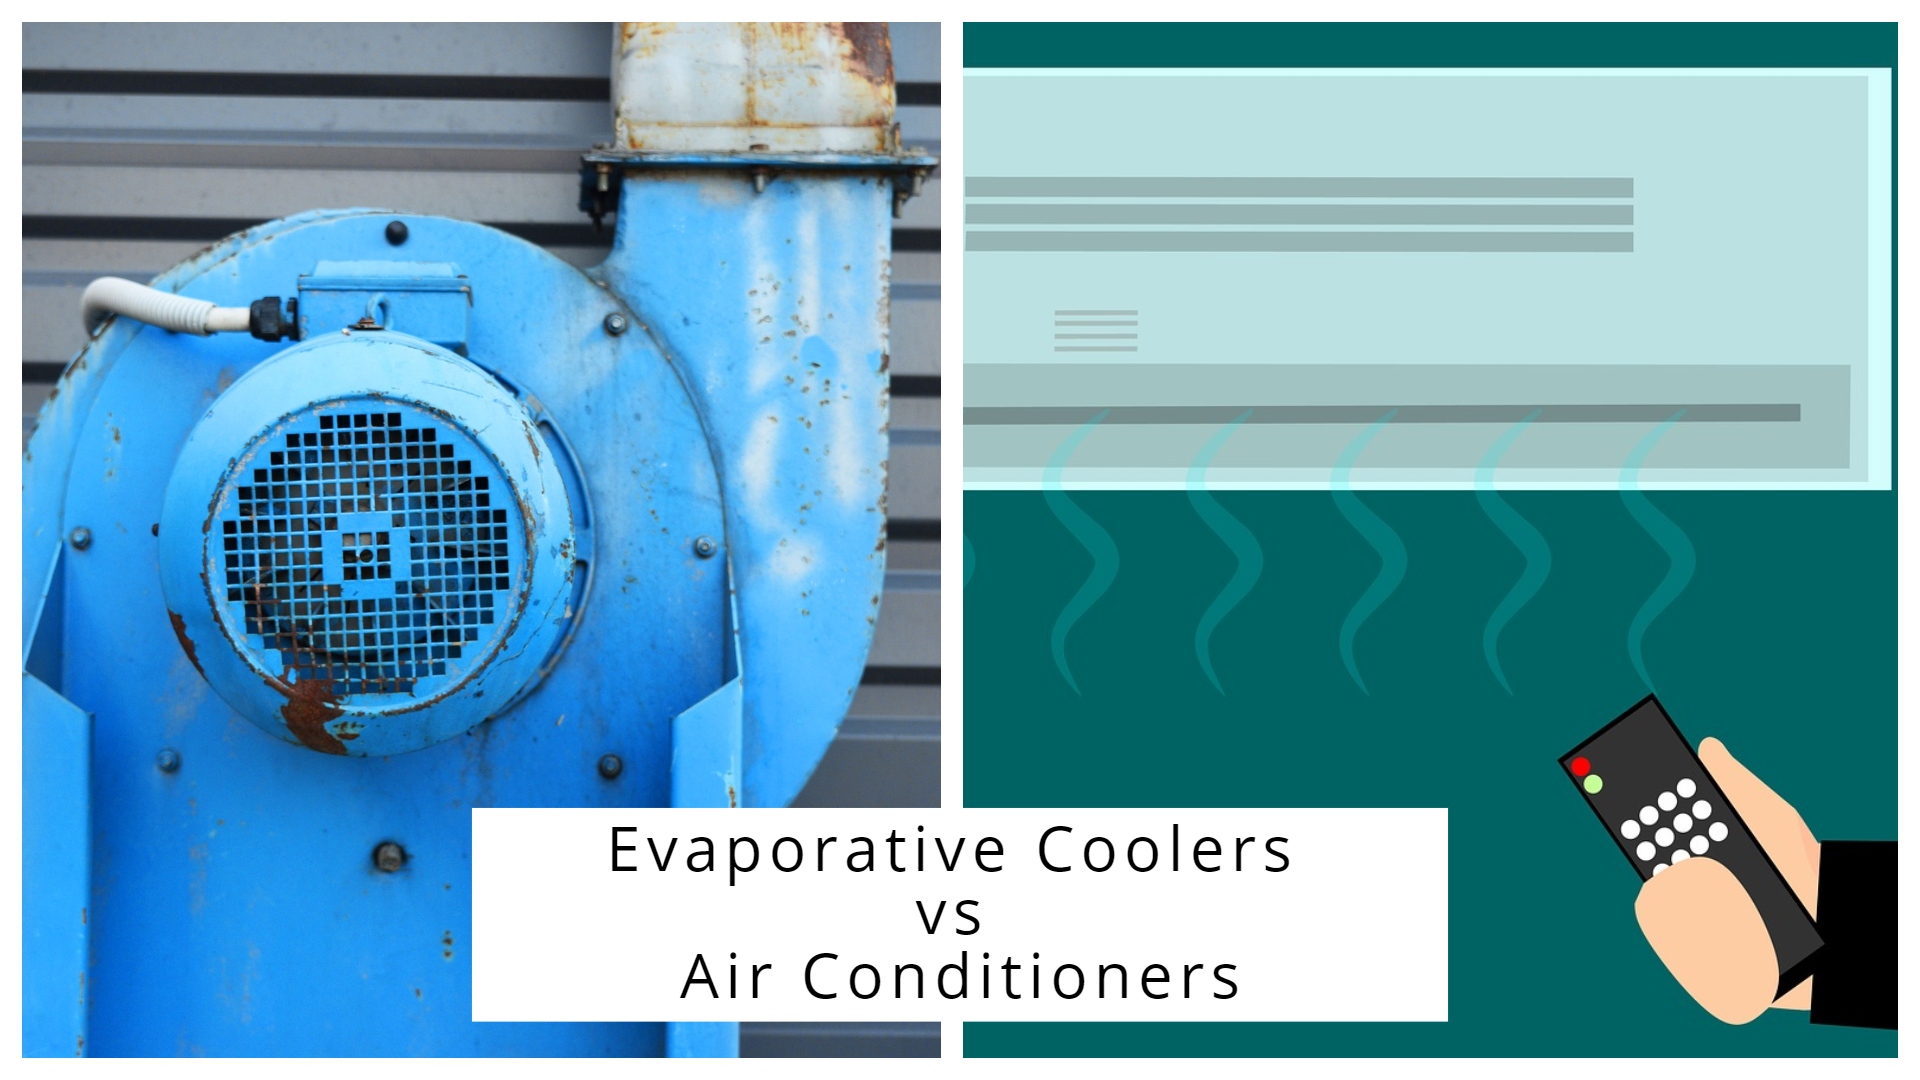 How Does an Evaporative Cooler Work? How Is It Different from Air Conditioners?